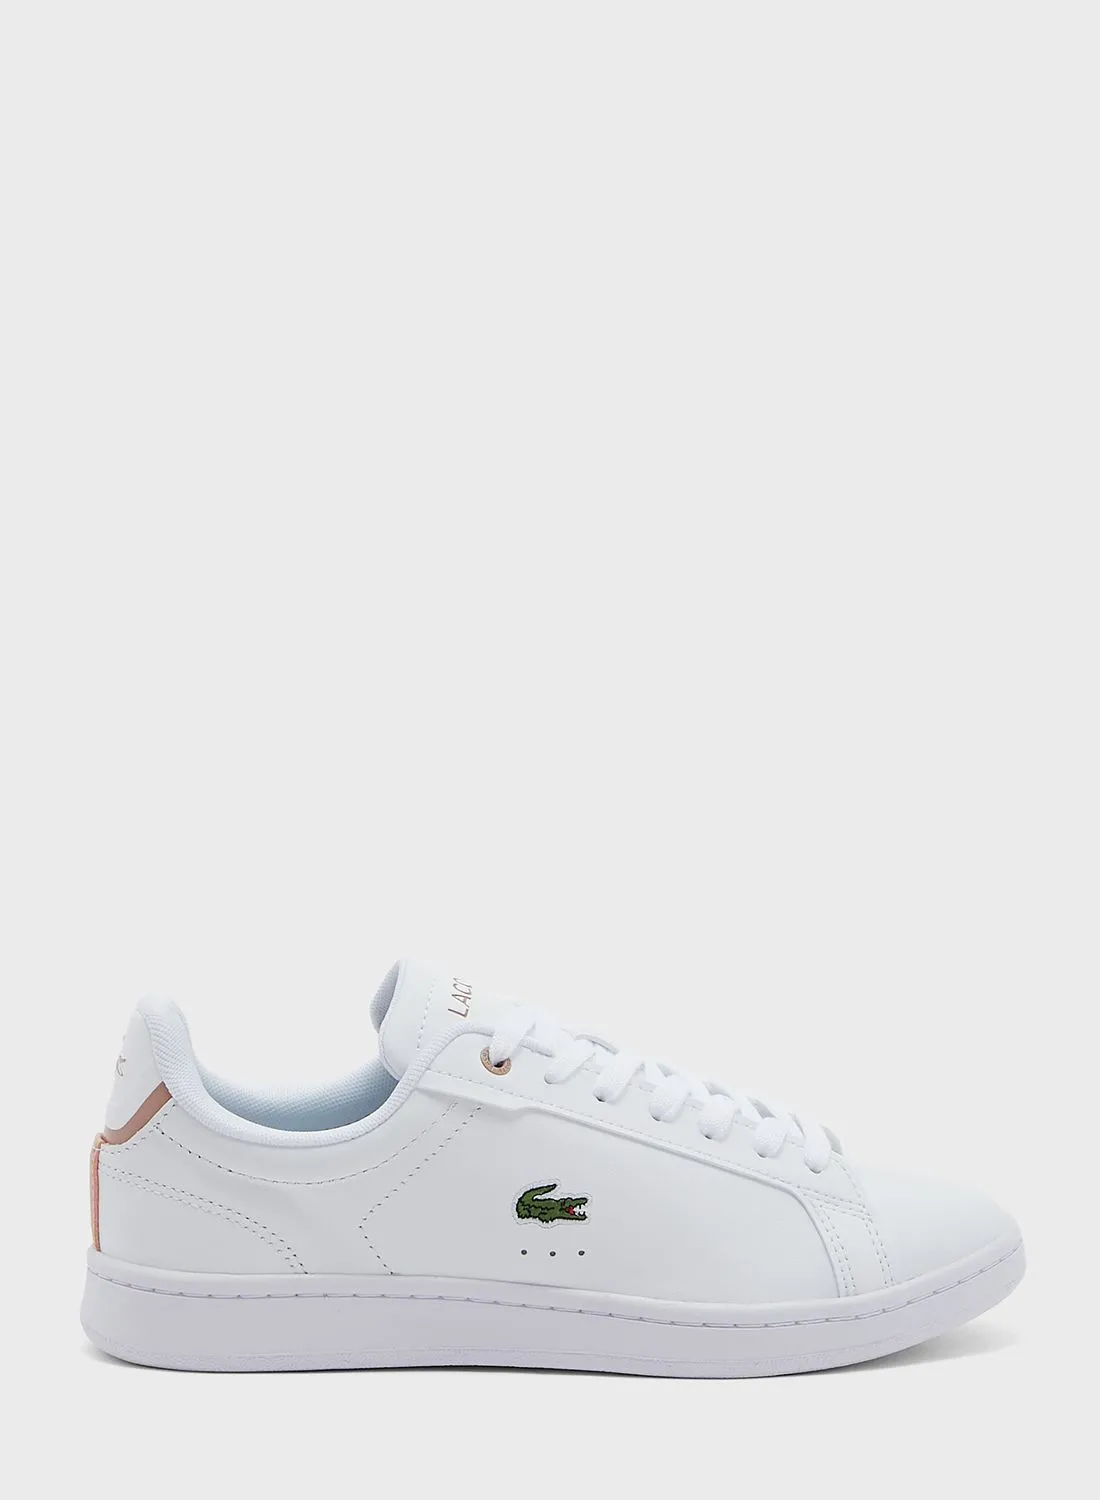 LACOSTE Carnaby Pro BL 23 1 Low Top Sneakers